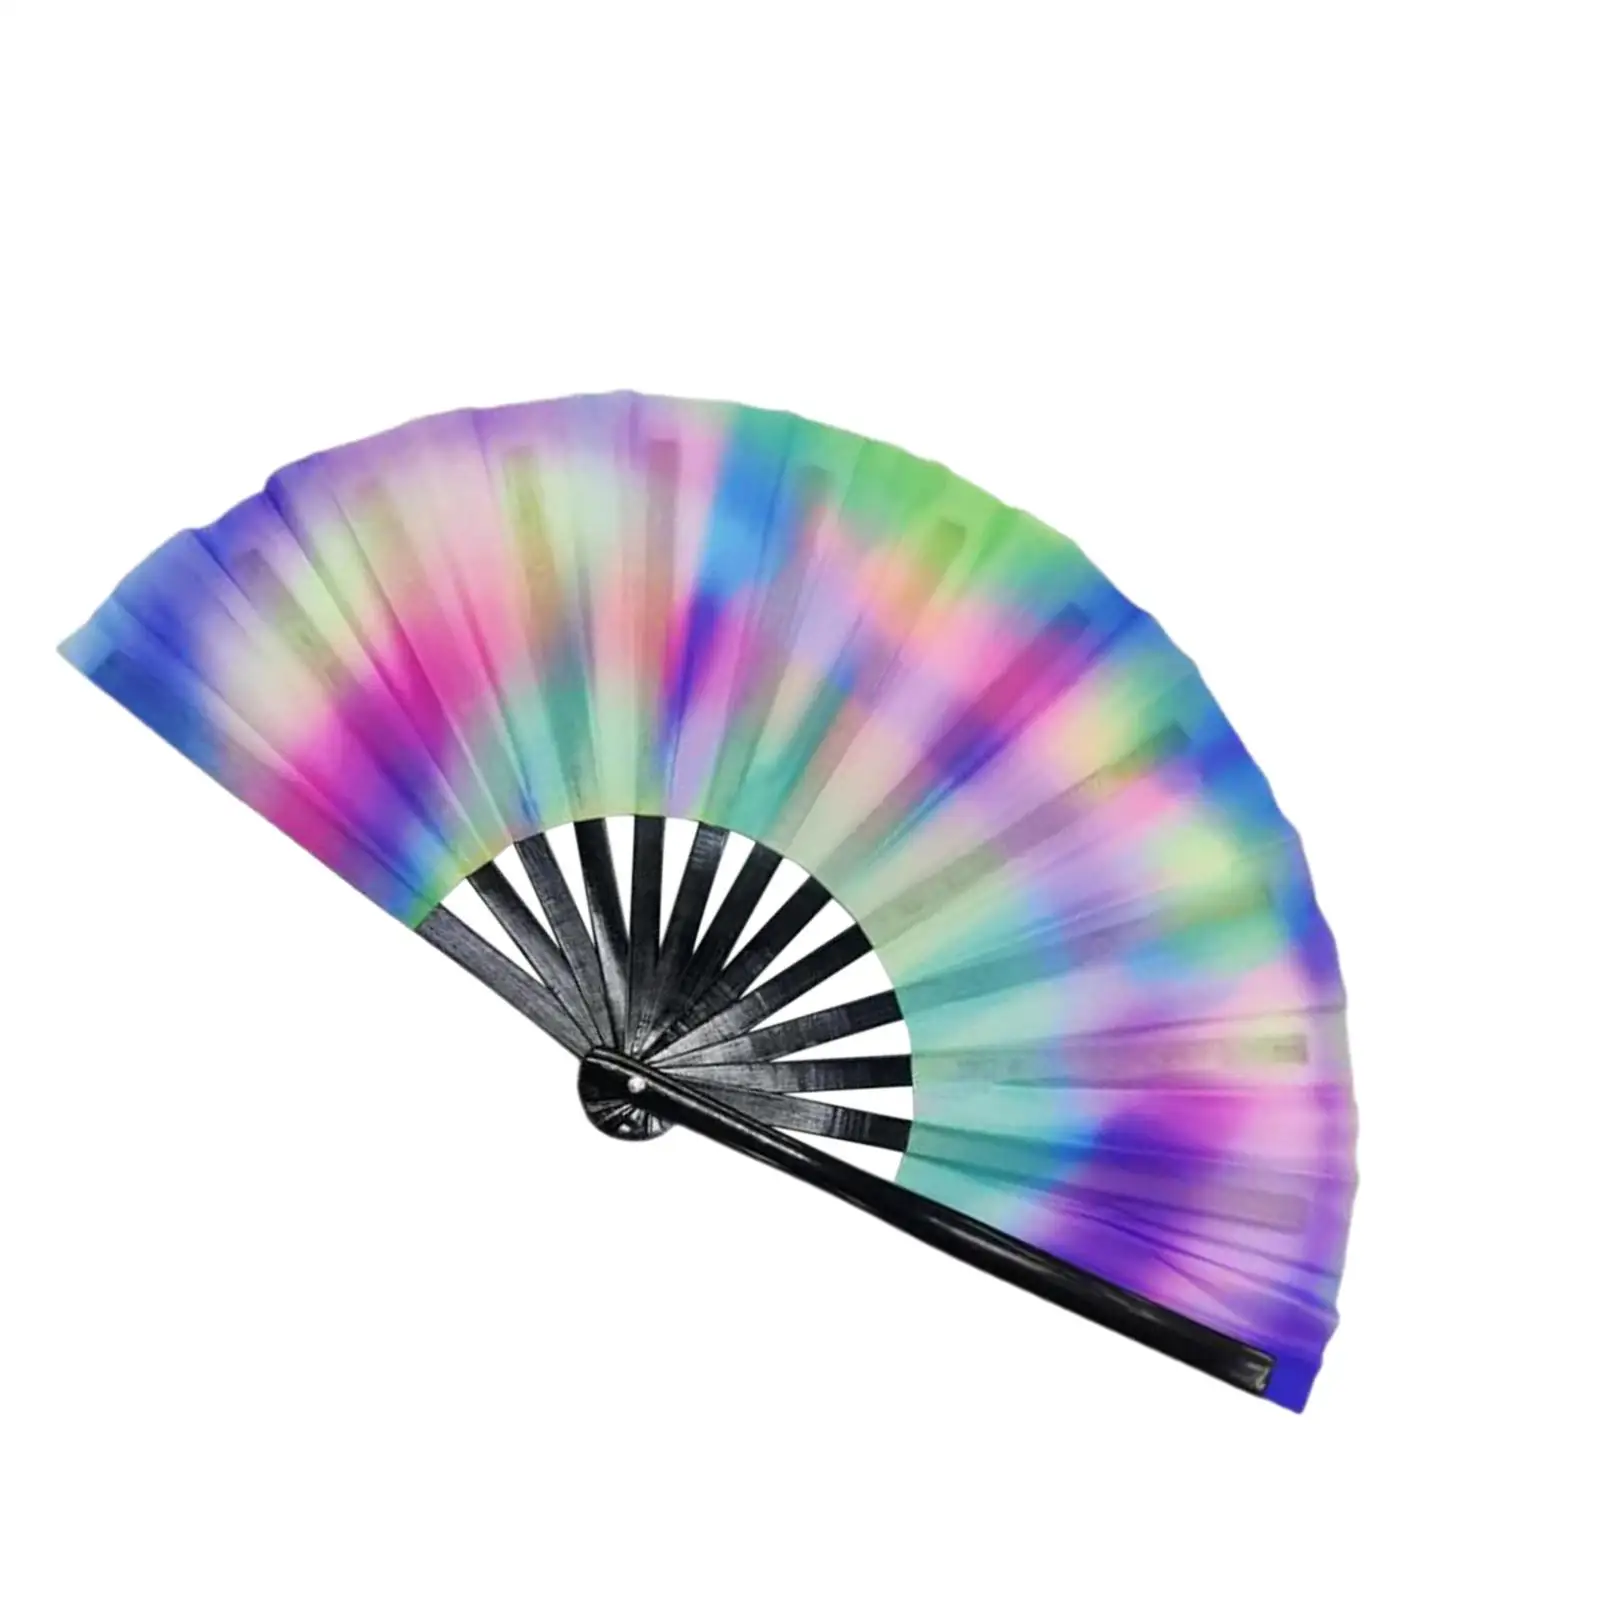 Large Rave Folding Hand Fan Fluorescent Effects Women Men Folding Fan for Gift Party Supplies Wedding Concerts Stage Performance